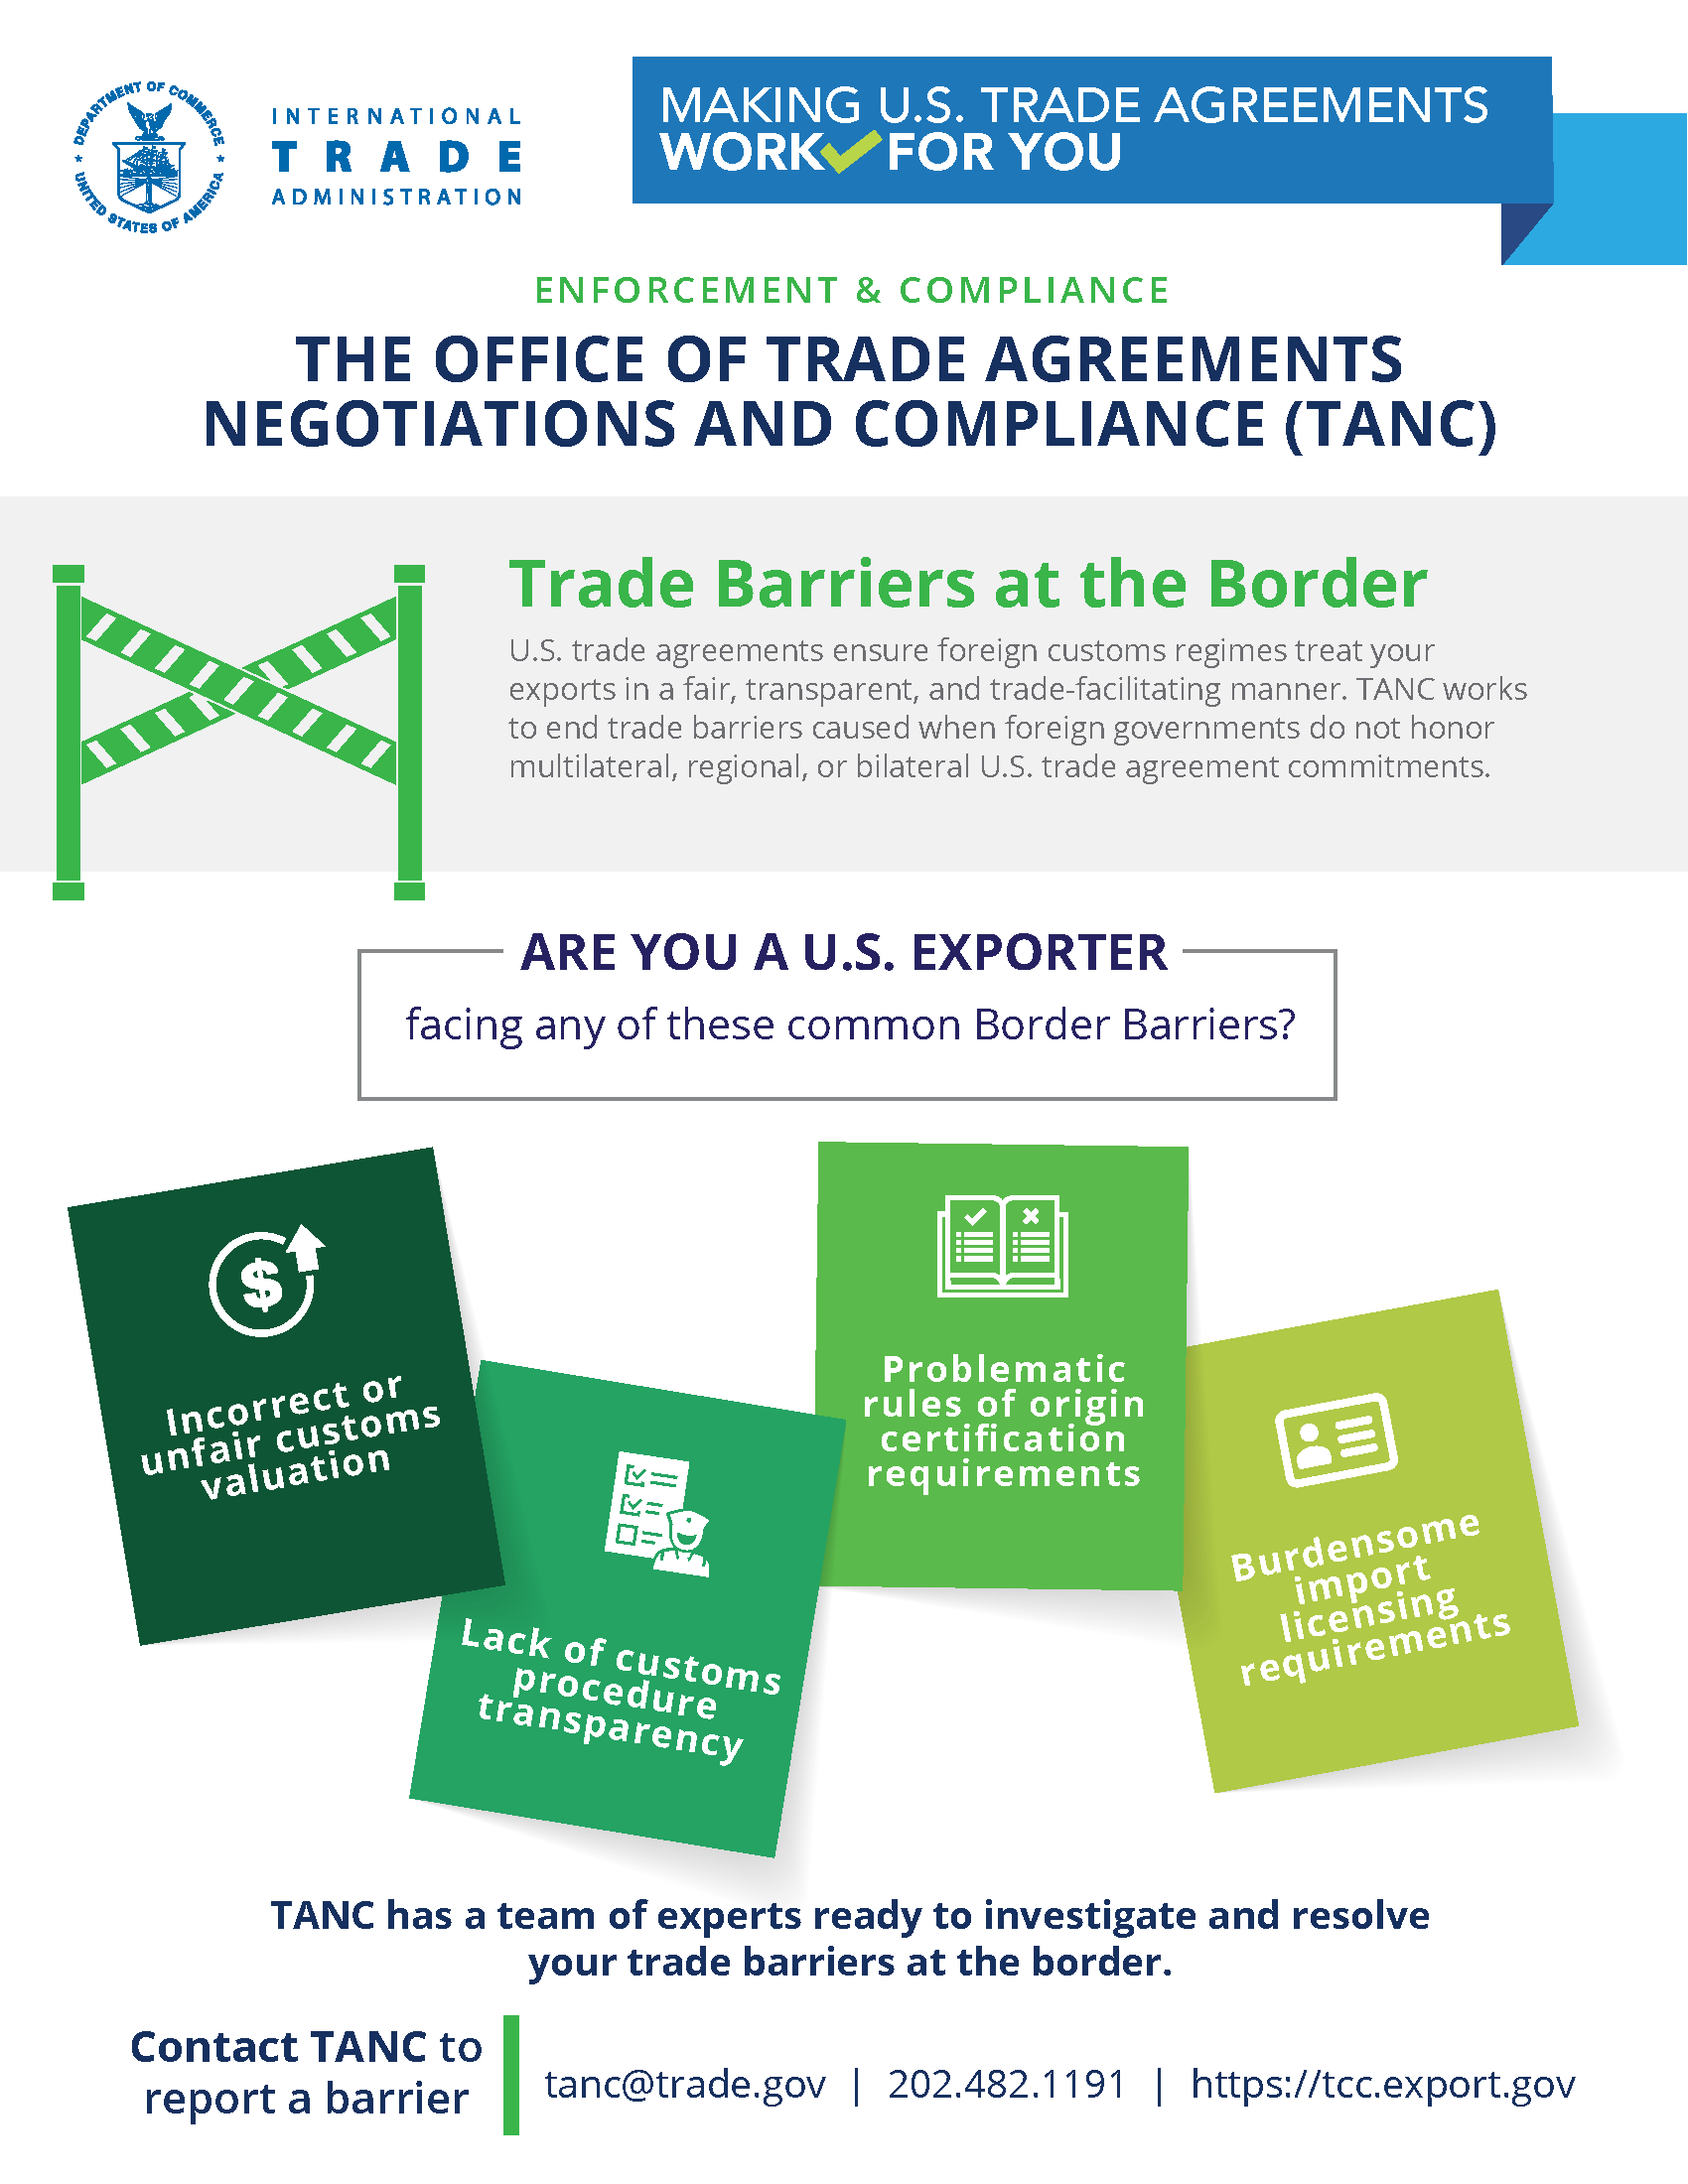 An infographic describing in plain English how to recognize when an exporter is facing a Border Barrier such as customs.